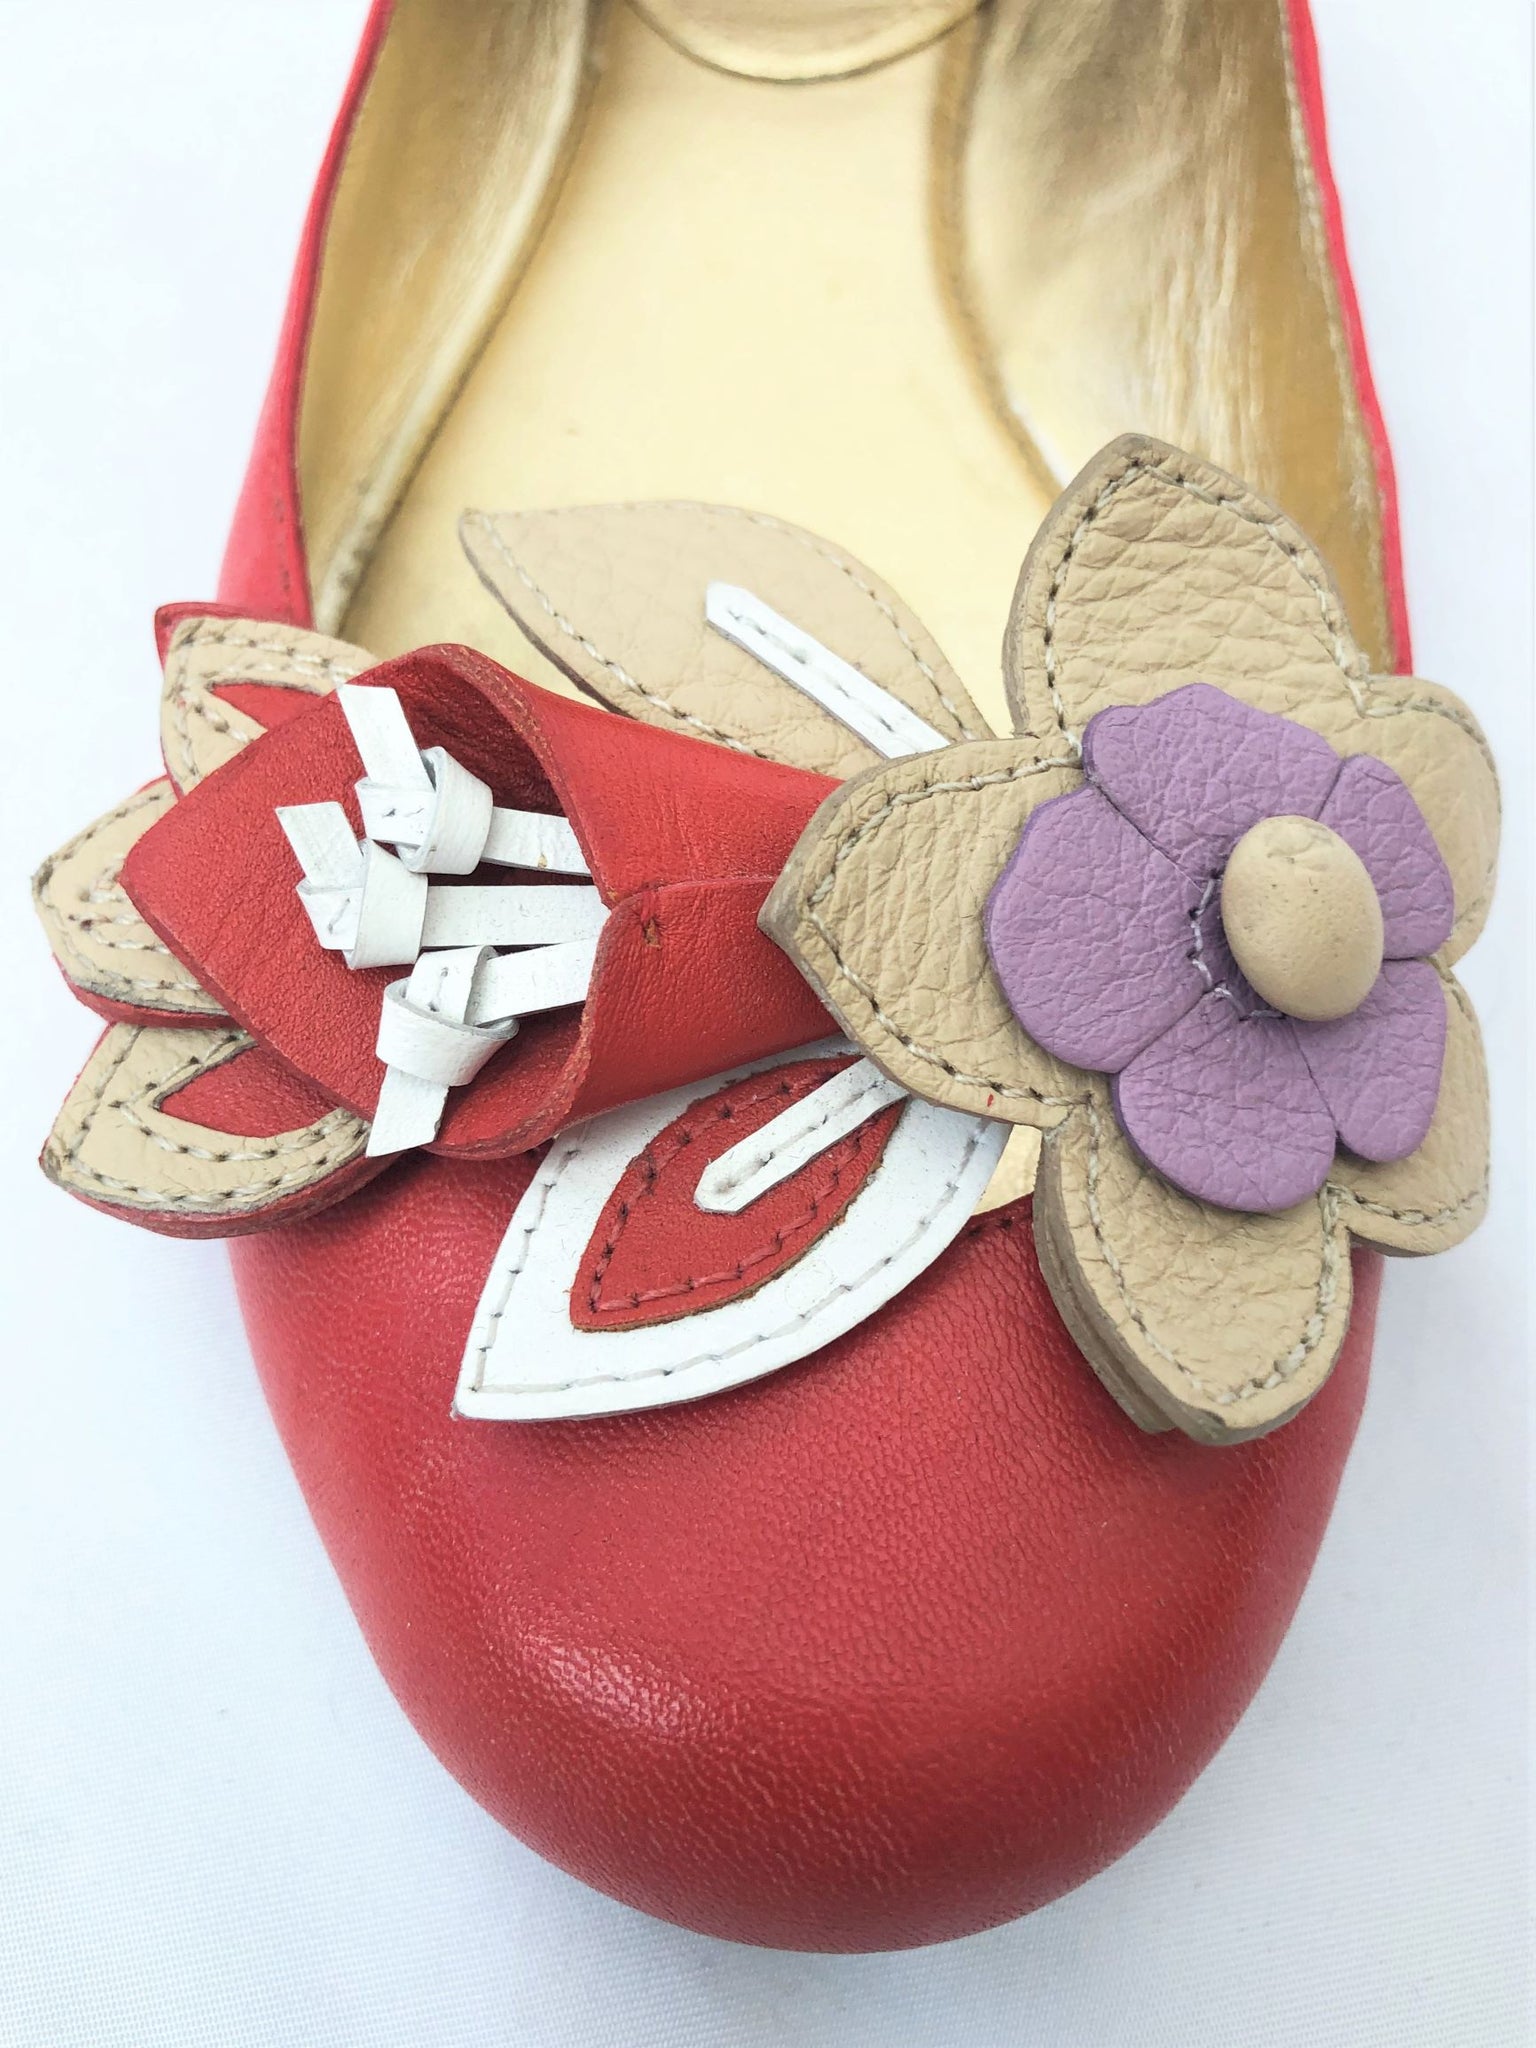 COACH Size 6 Chrisann Red Leather Floral Flats